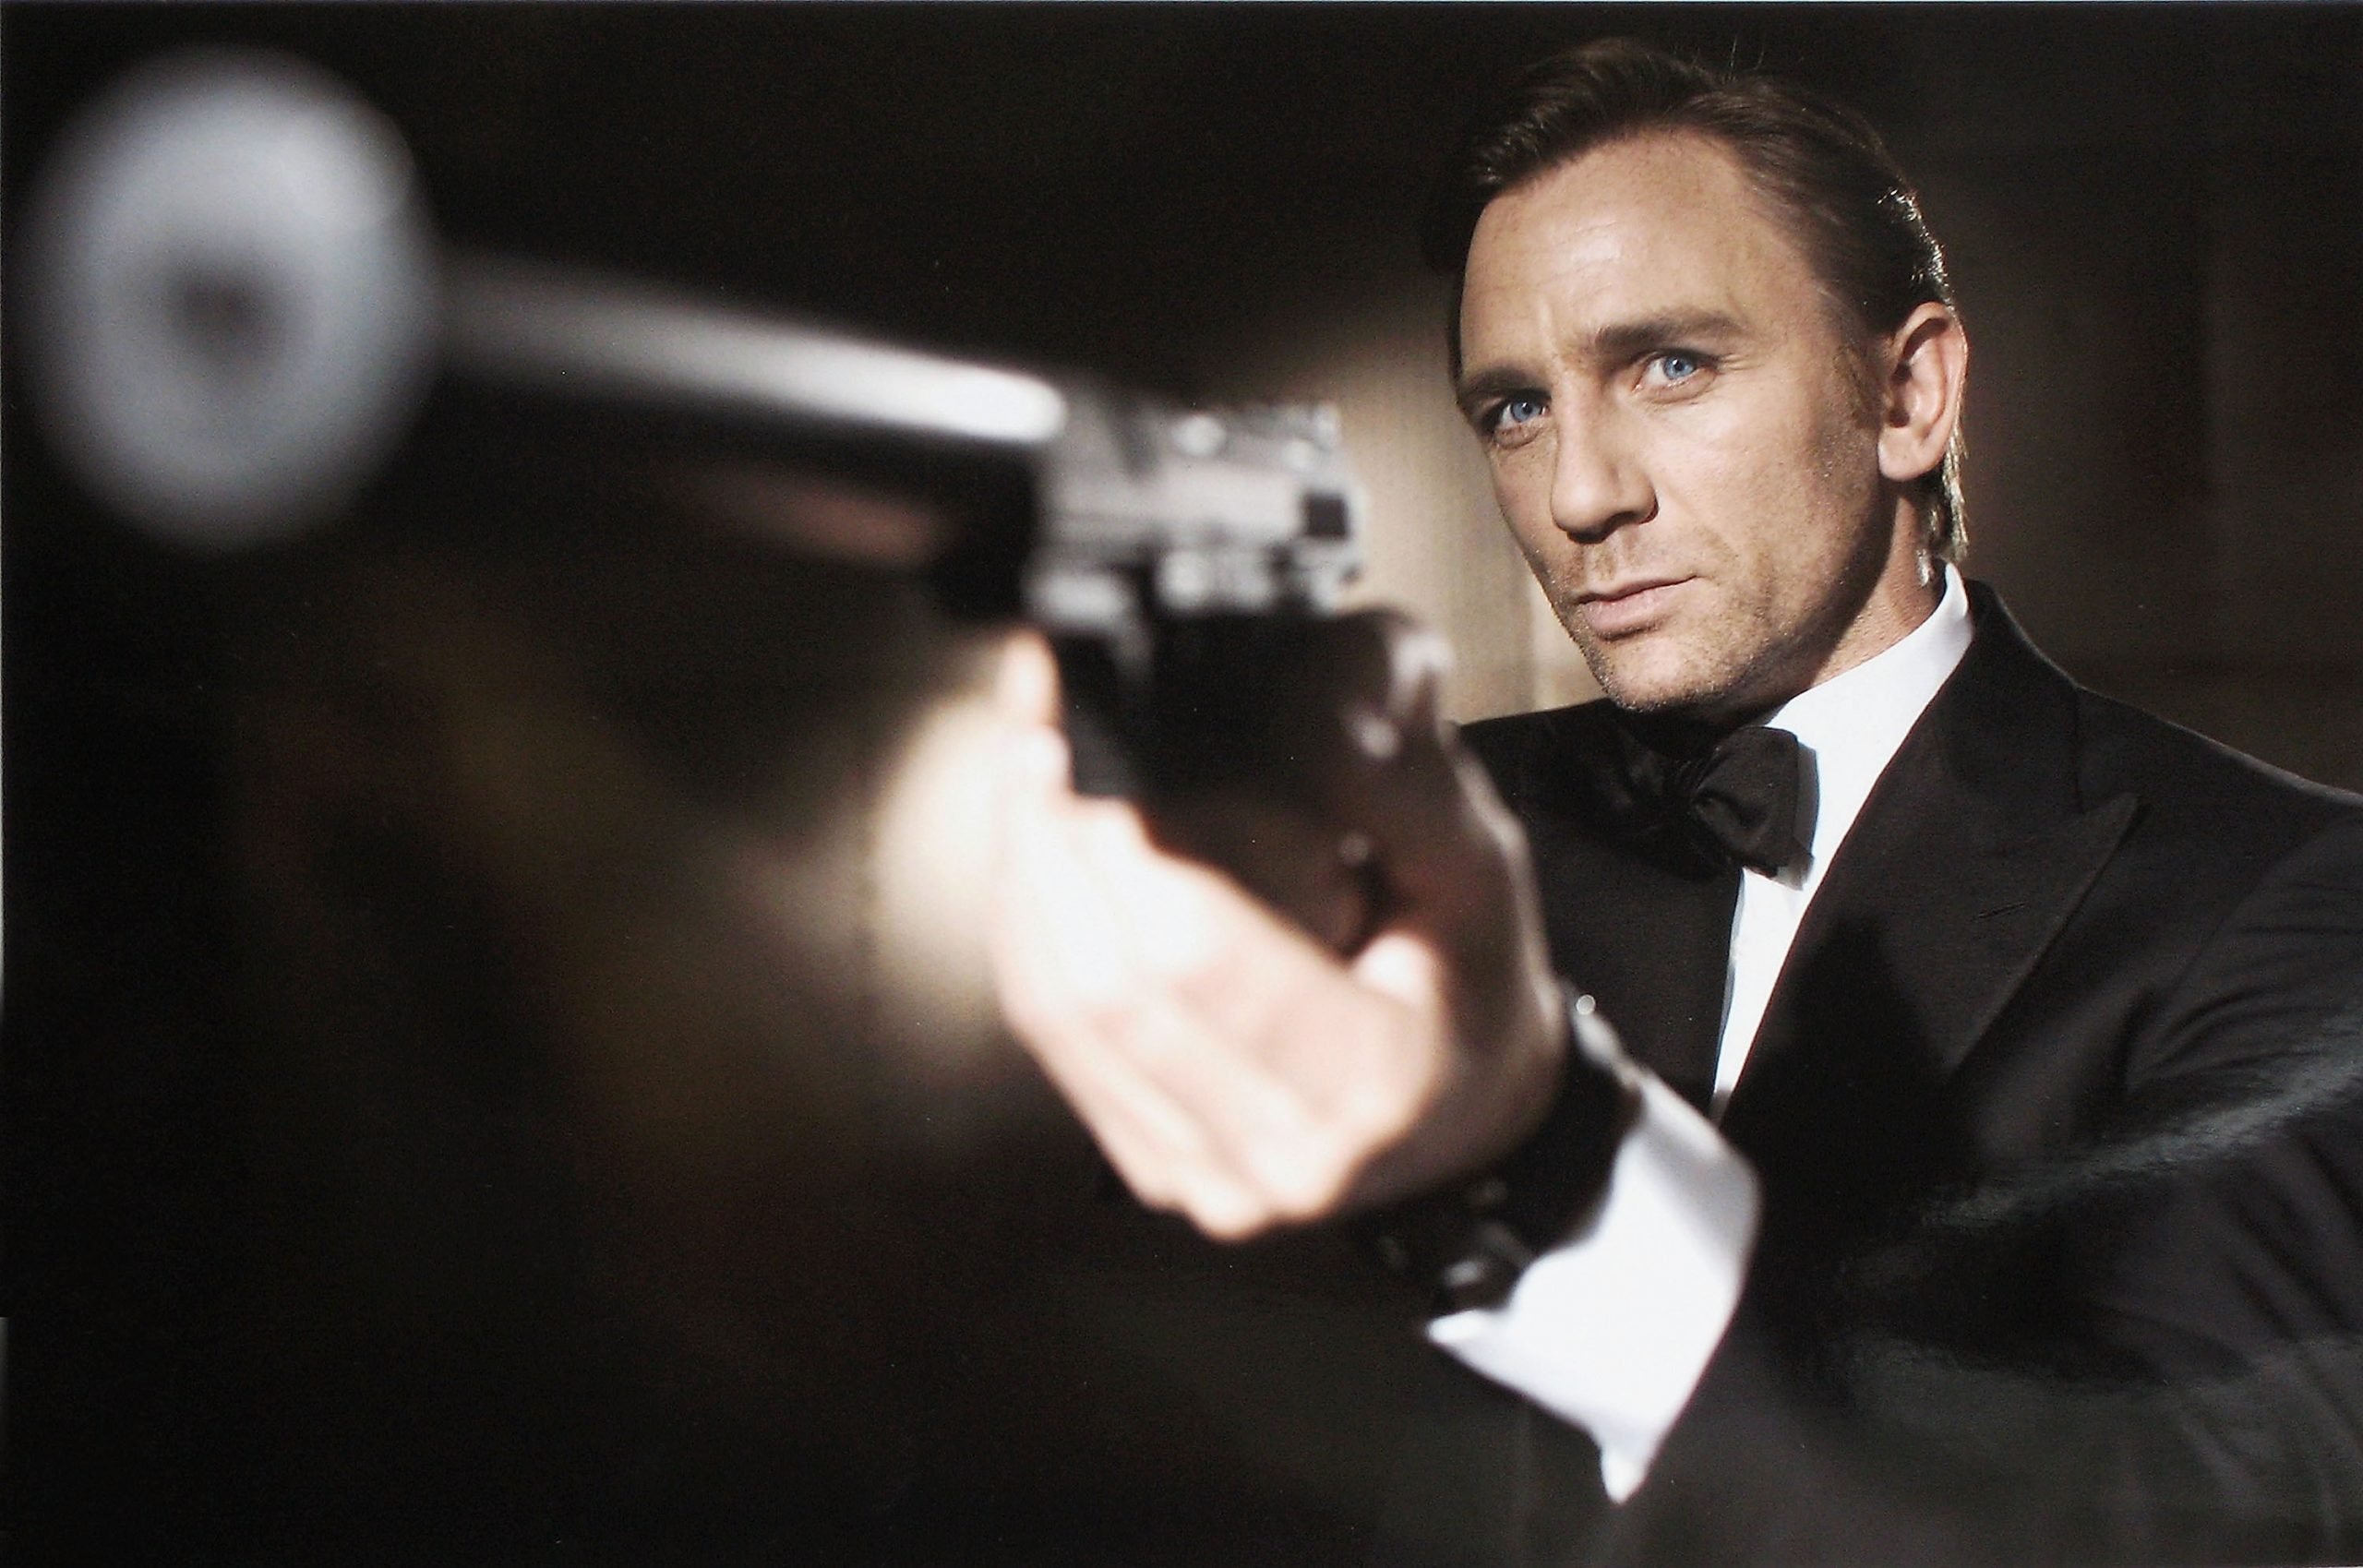 James Bond Day: Everything You Need to Celebrate the Day With a Bond-Themed Movie Marathon